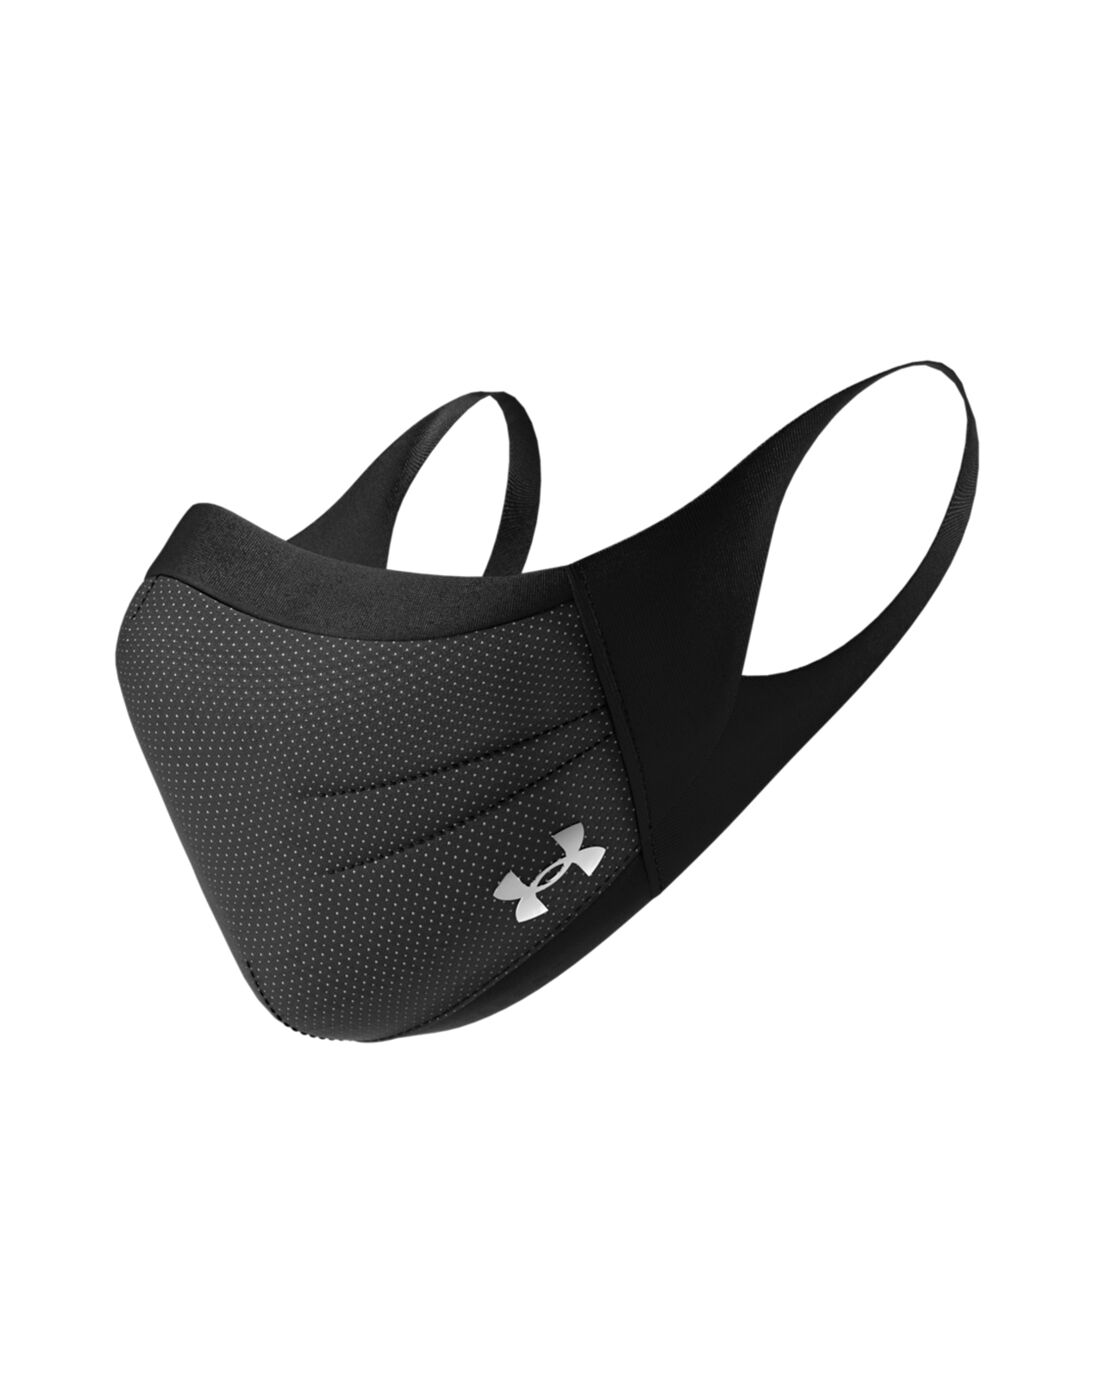 adidas running shoes academy IE - adidas xplr sesame commercial kids play  areas | Black - Under Armour Sports Face Mask